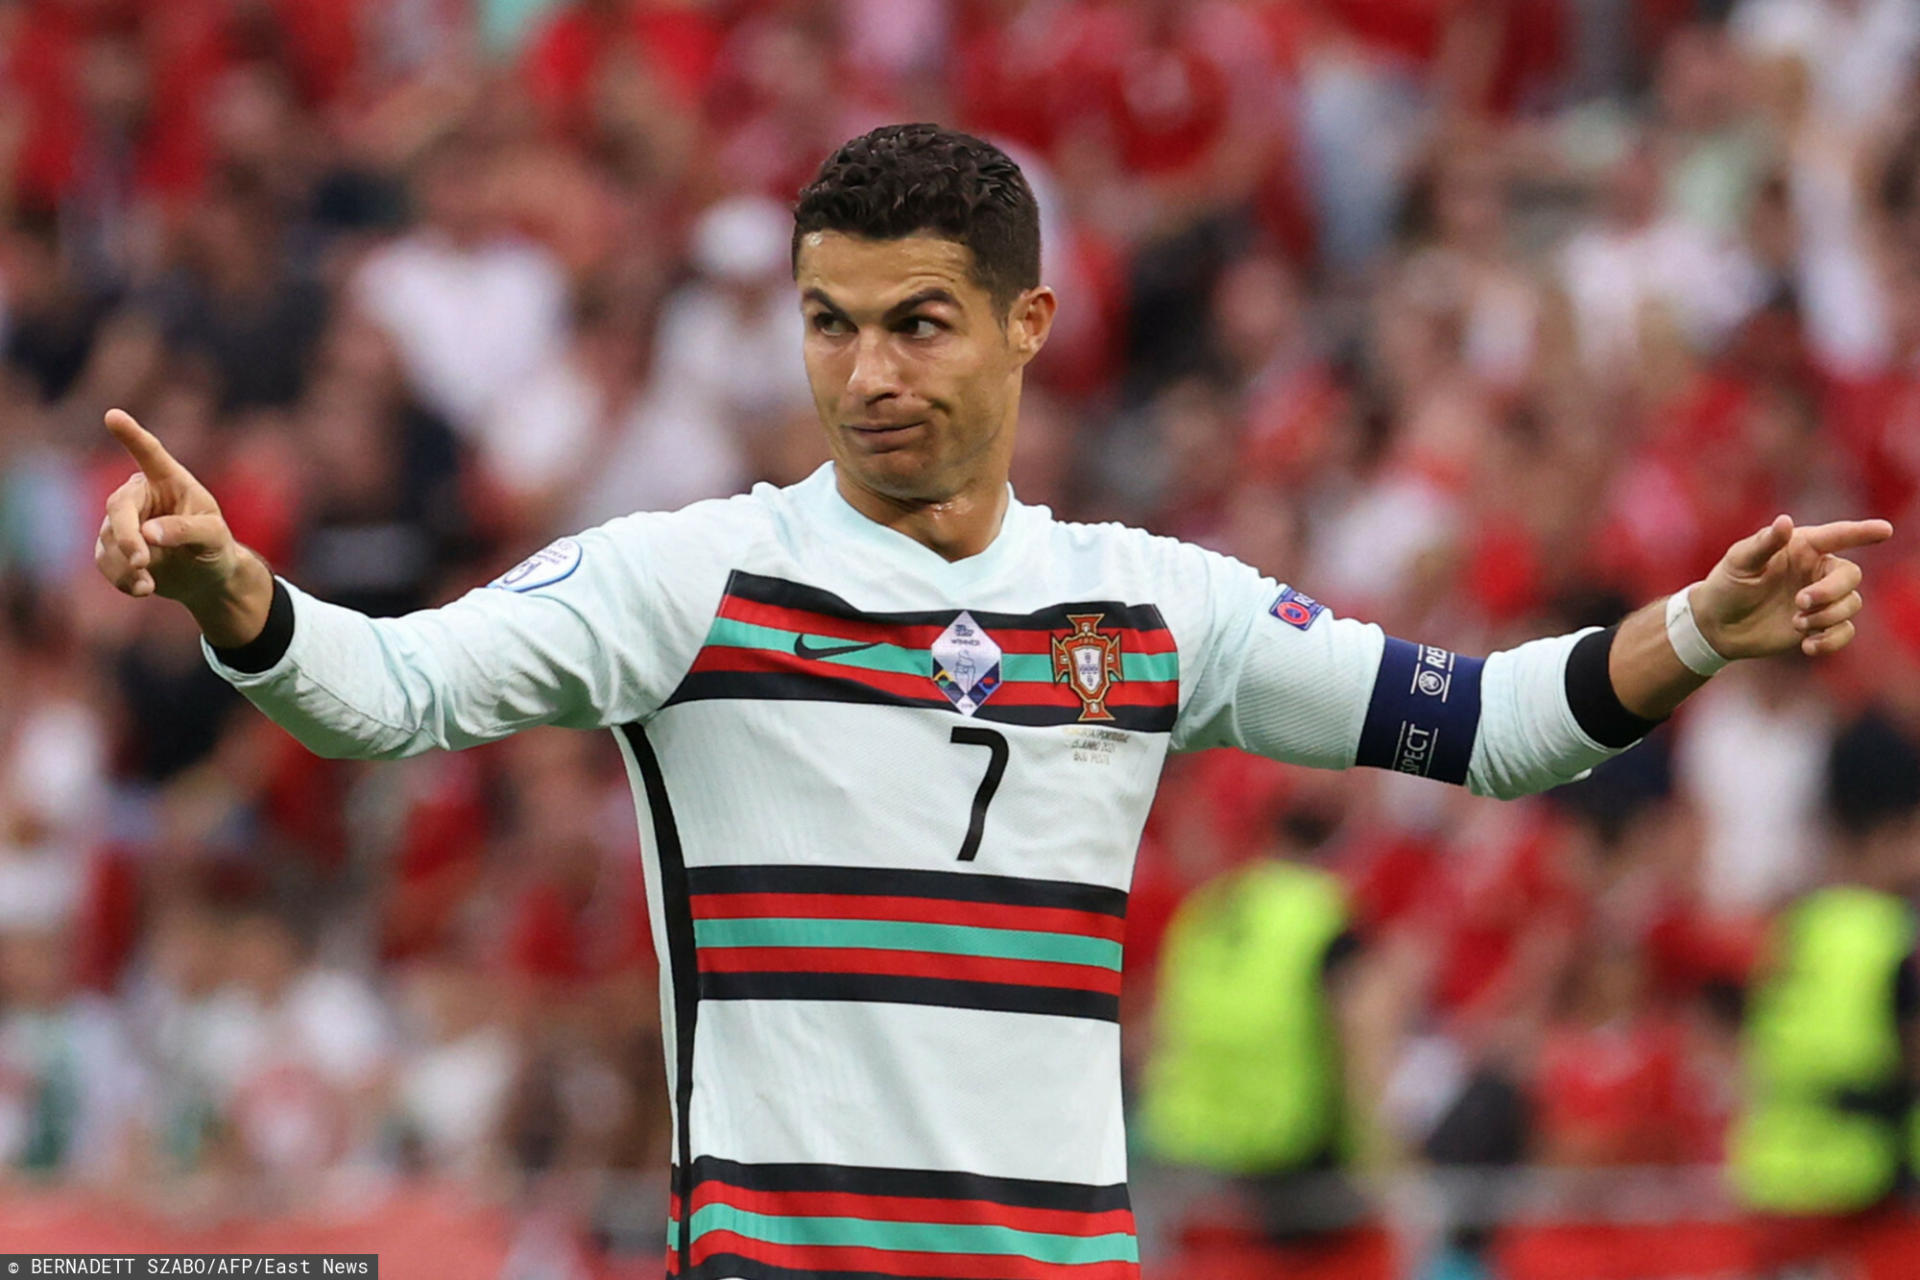 Portugal's forward Cristiano Ronaldo reacts during the UEFA EURO 2020 Group F football match between Hungary and Portugal at the Puskas Arena in Budapest on June 15, 2021. (Photo by BERNADETT SZABO / various sources / AFP)